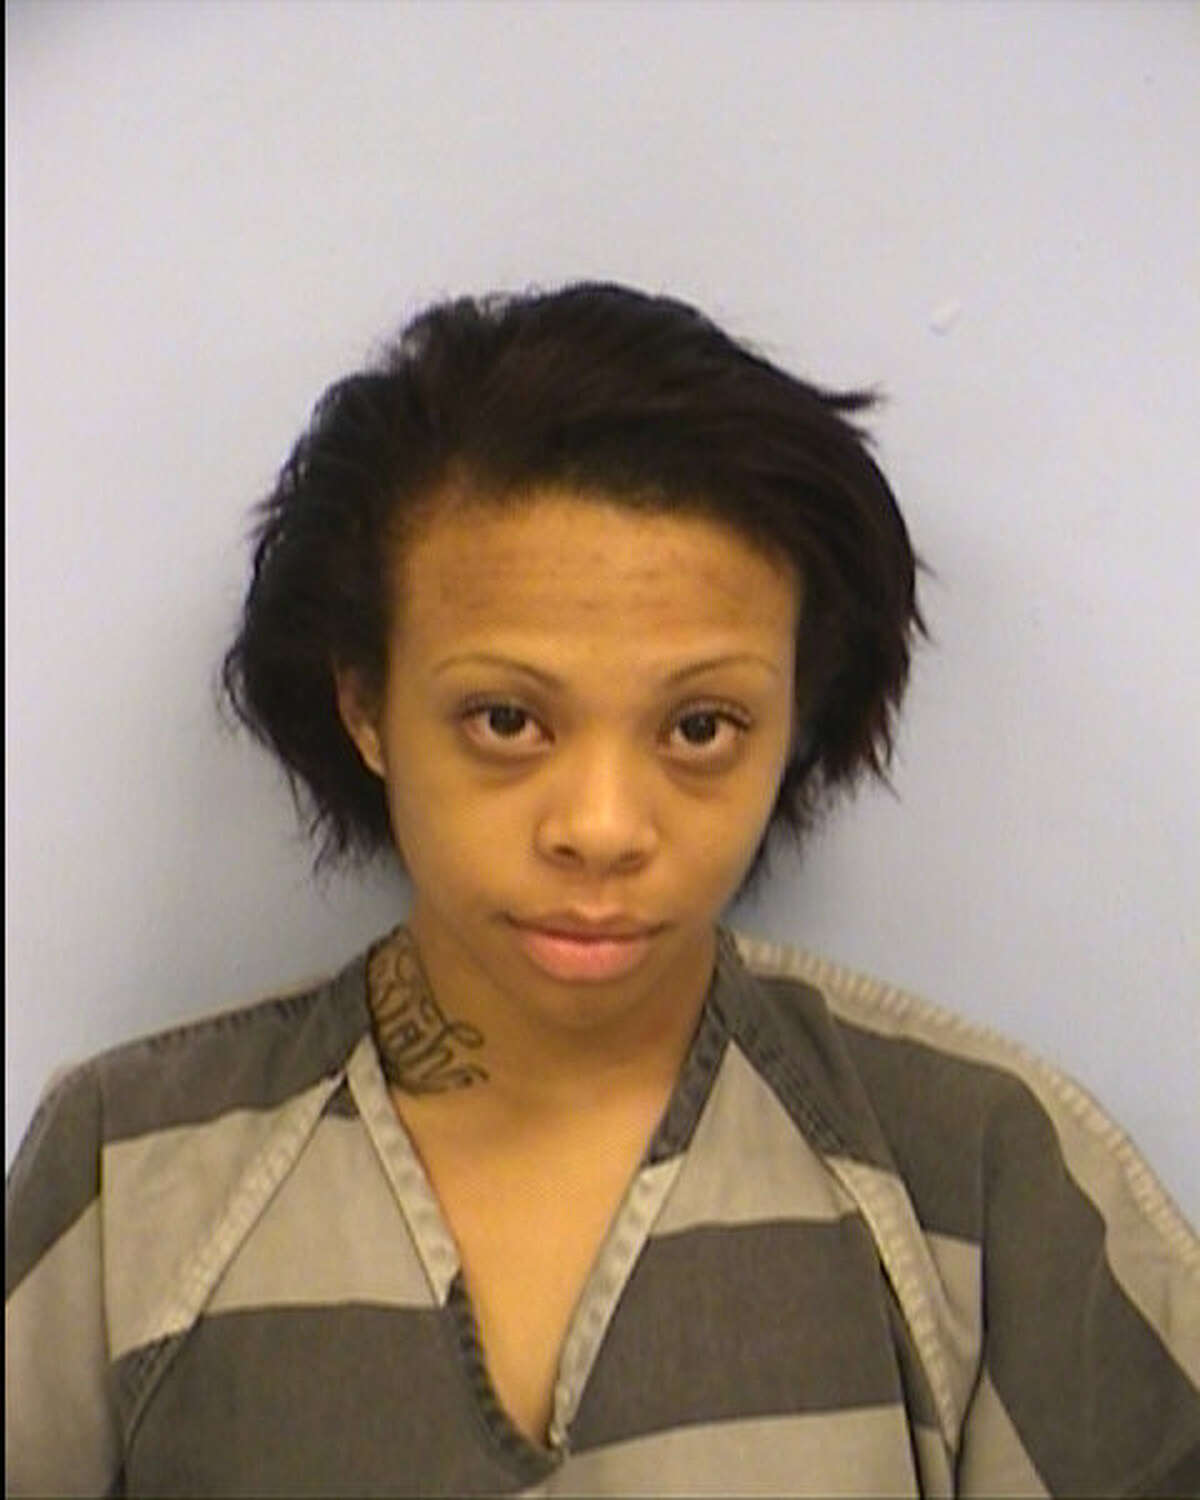 Tatjana Monique Valdez has been charged with possession of a controlled substance, delivery of a controlled substance and unauthorized absence from a community correctional facility, according to Travis County Jail records.